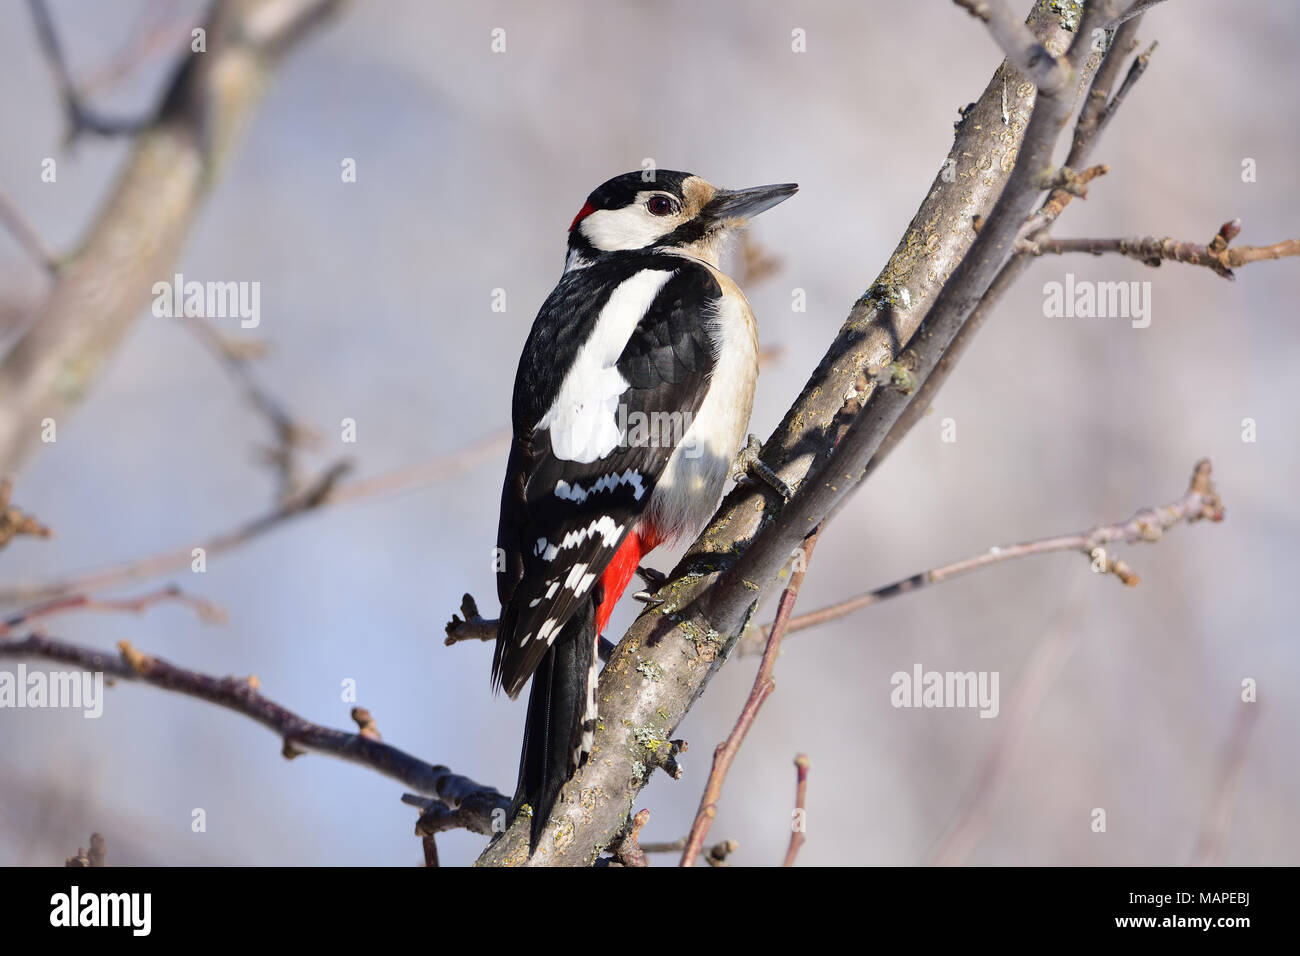 Great spotted woodpecker (Dendrocopos major) sits in the branches of a wild apple tree: very close, can see every feather, glare in the eye. Stock Photo